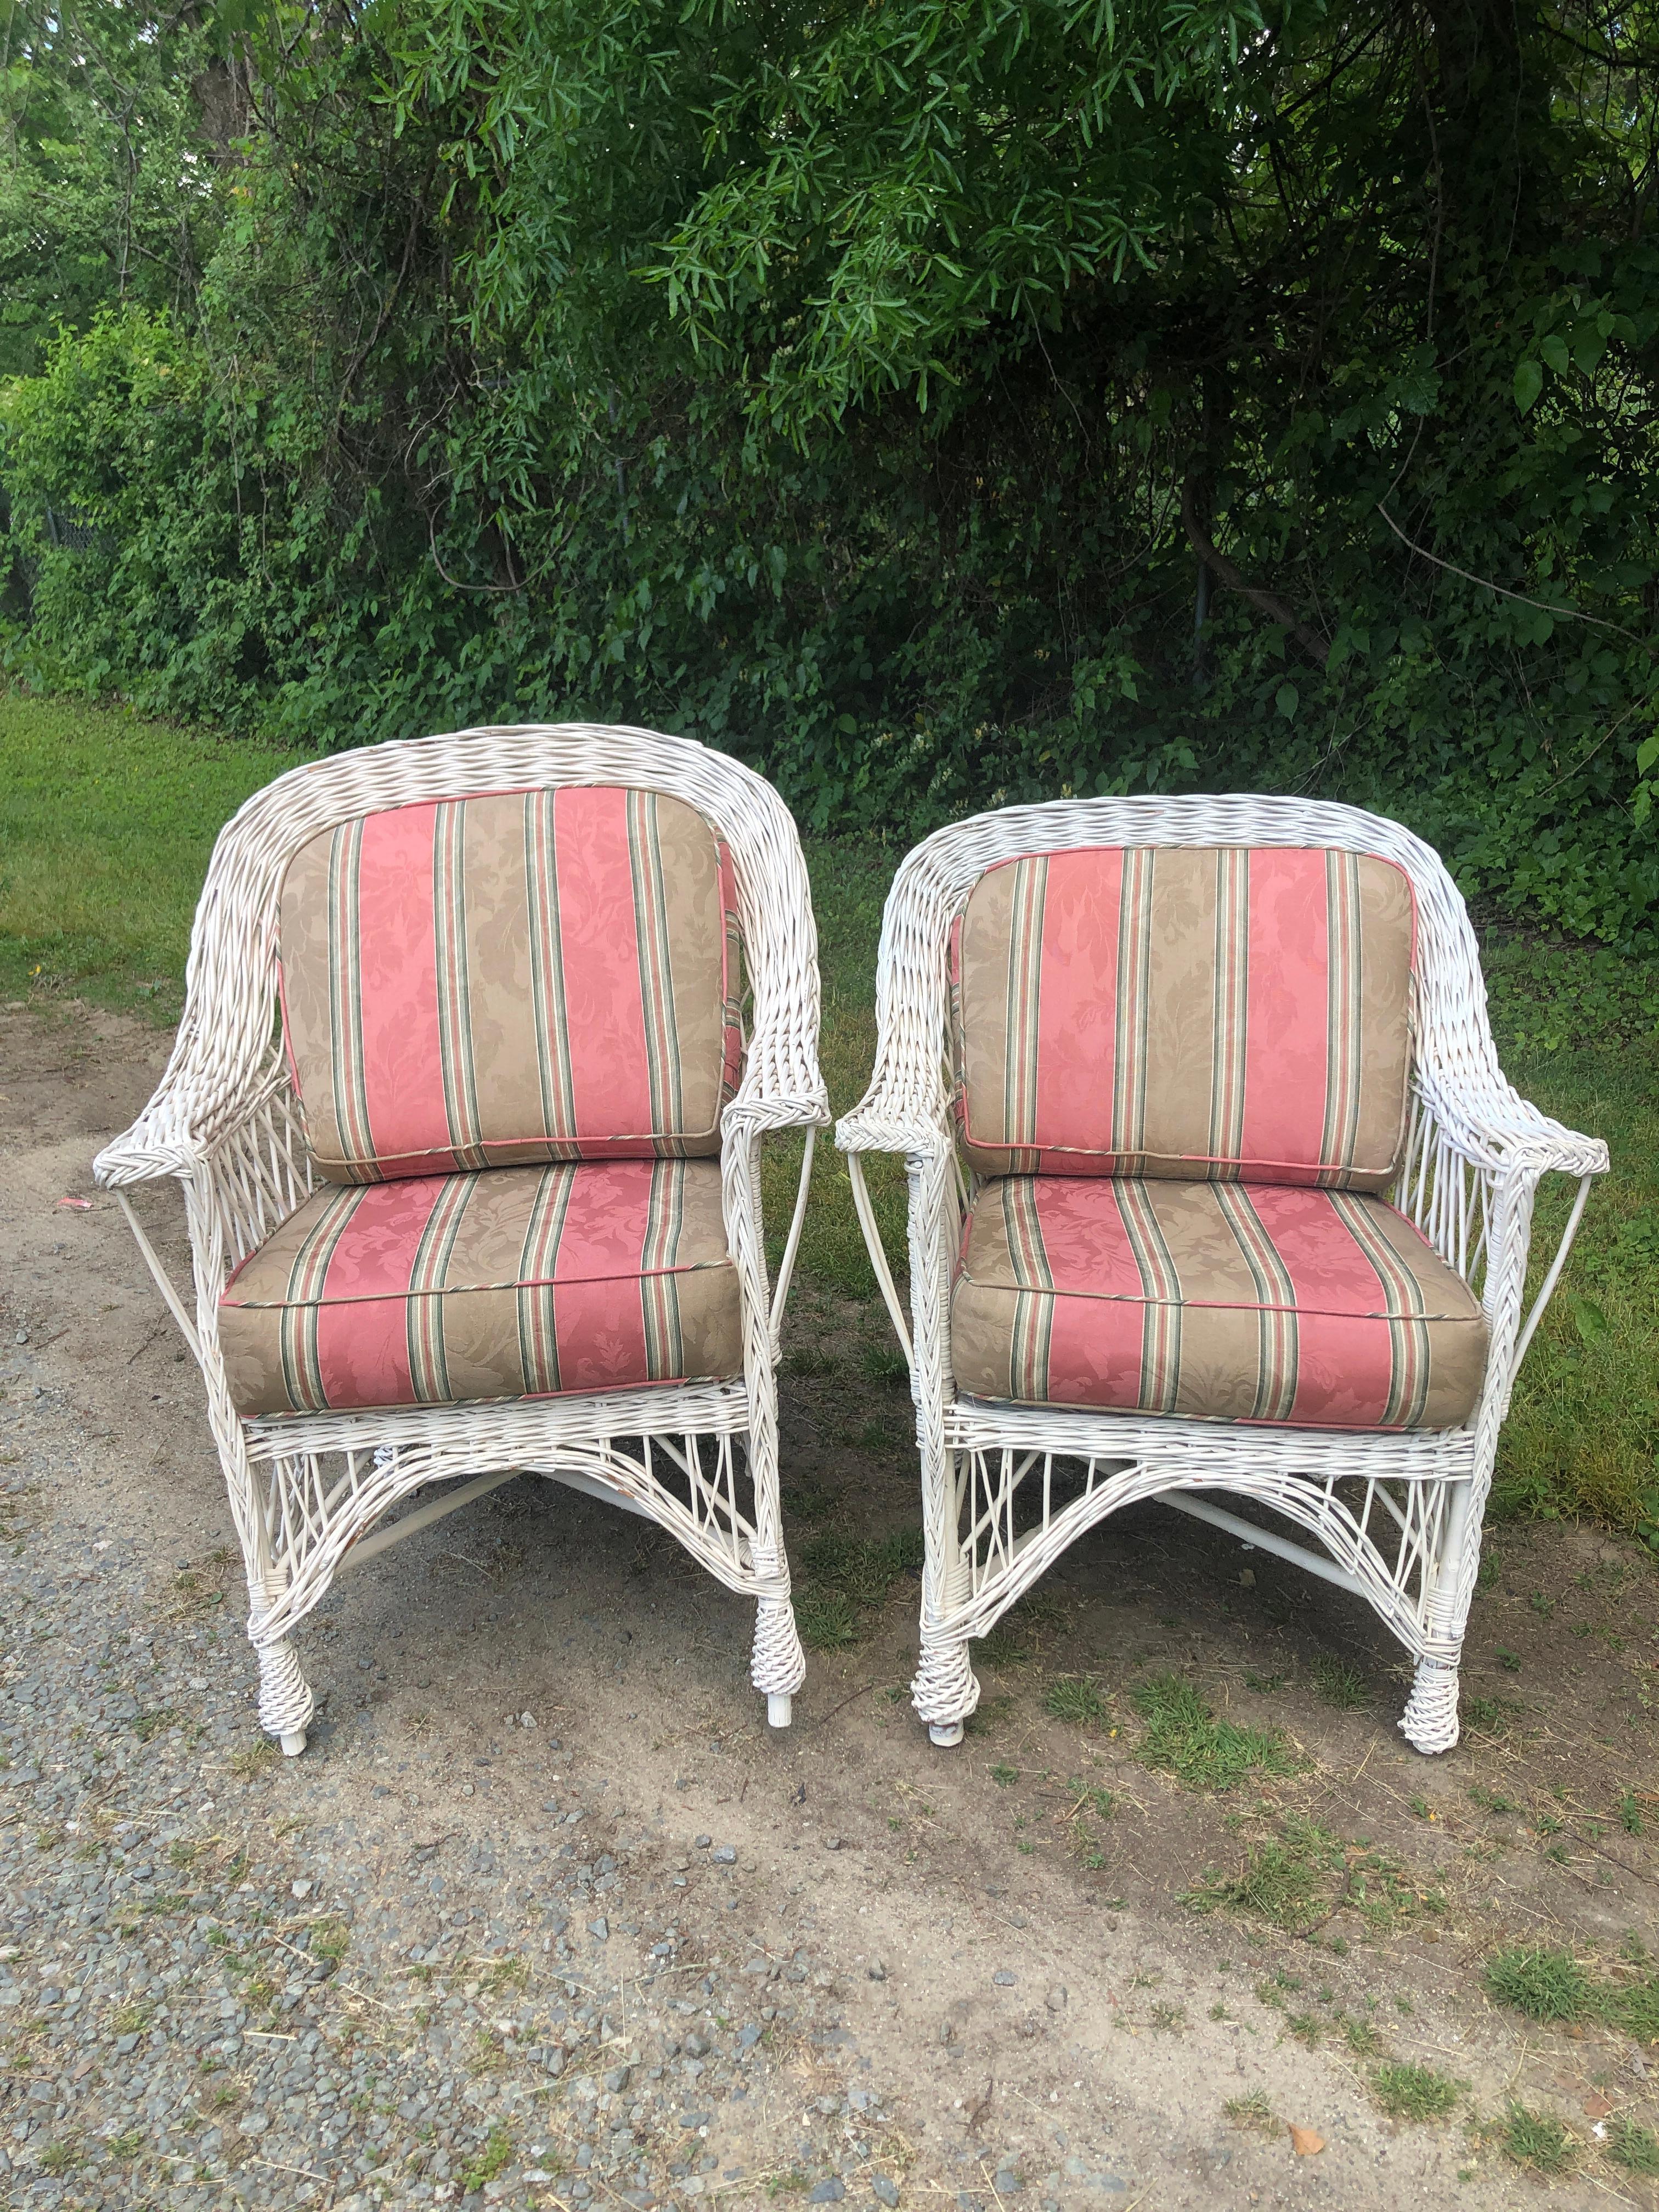 Pair of Bar Harbor White Wicker Armchairs. We have another pair of the same chairs in the same design. They are in a separate listing. They all came out the same house. The seats and back cushion upholstery are in good condition.
Please contact us